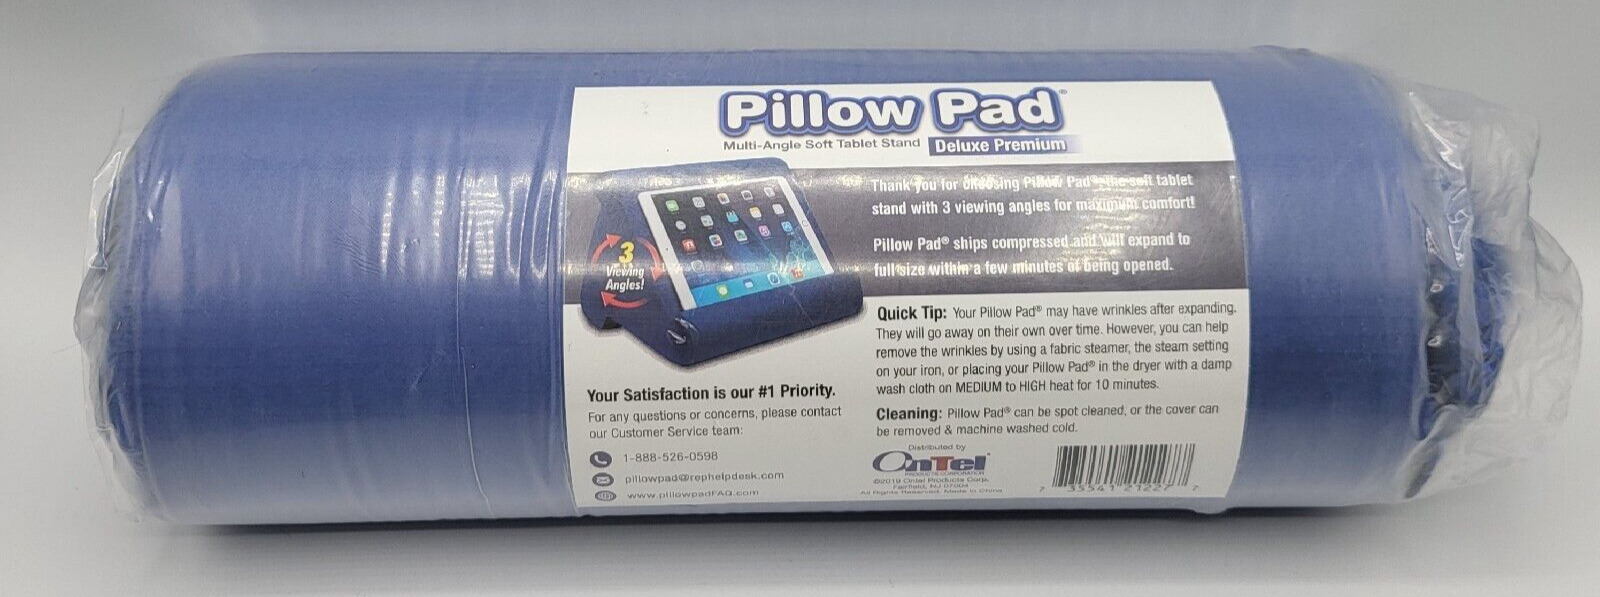 ONTEL PILLOW PAD Multi-Angle Soft Tablet Stand DELUXE PREMIUM - BLUE